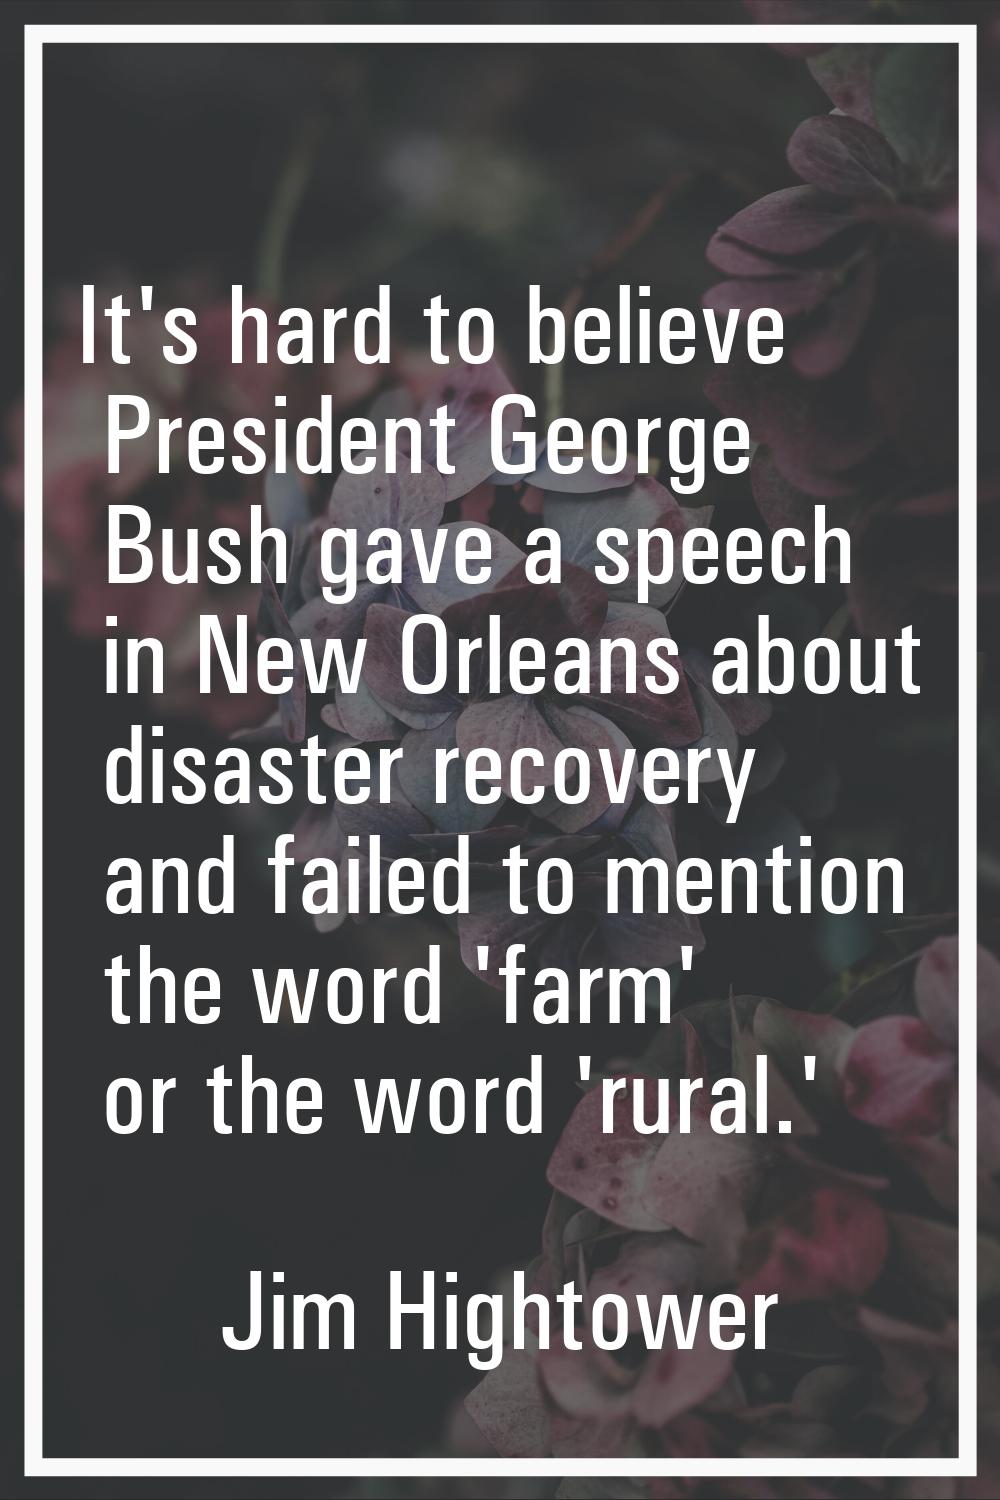 It's hard to believe President George Bush gave a speech in New Orleans about disaster recovery and